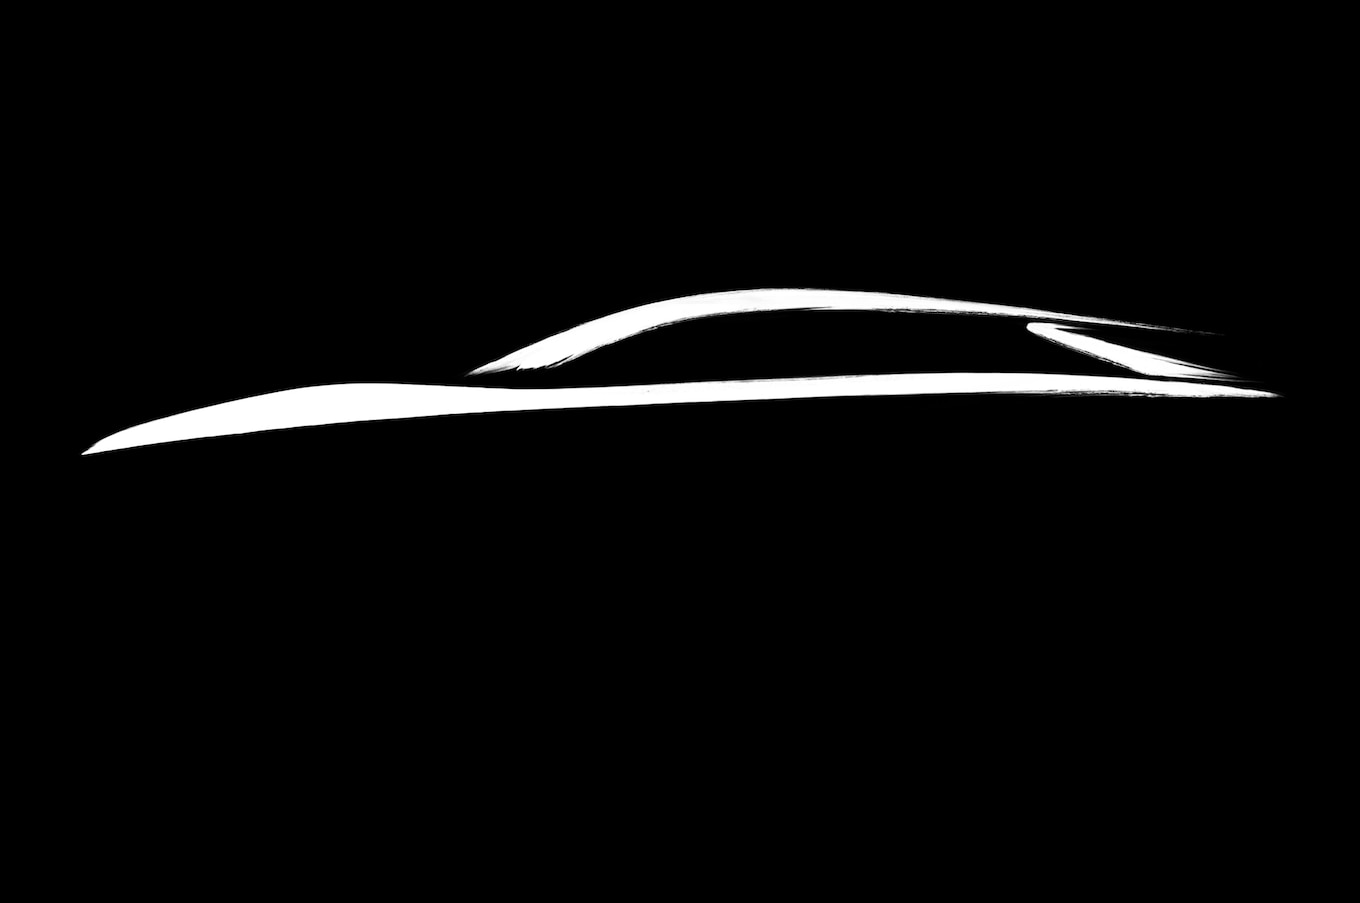 Infiniti Qx50 Concept Line Drawing Black Background Motortrend